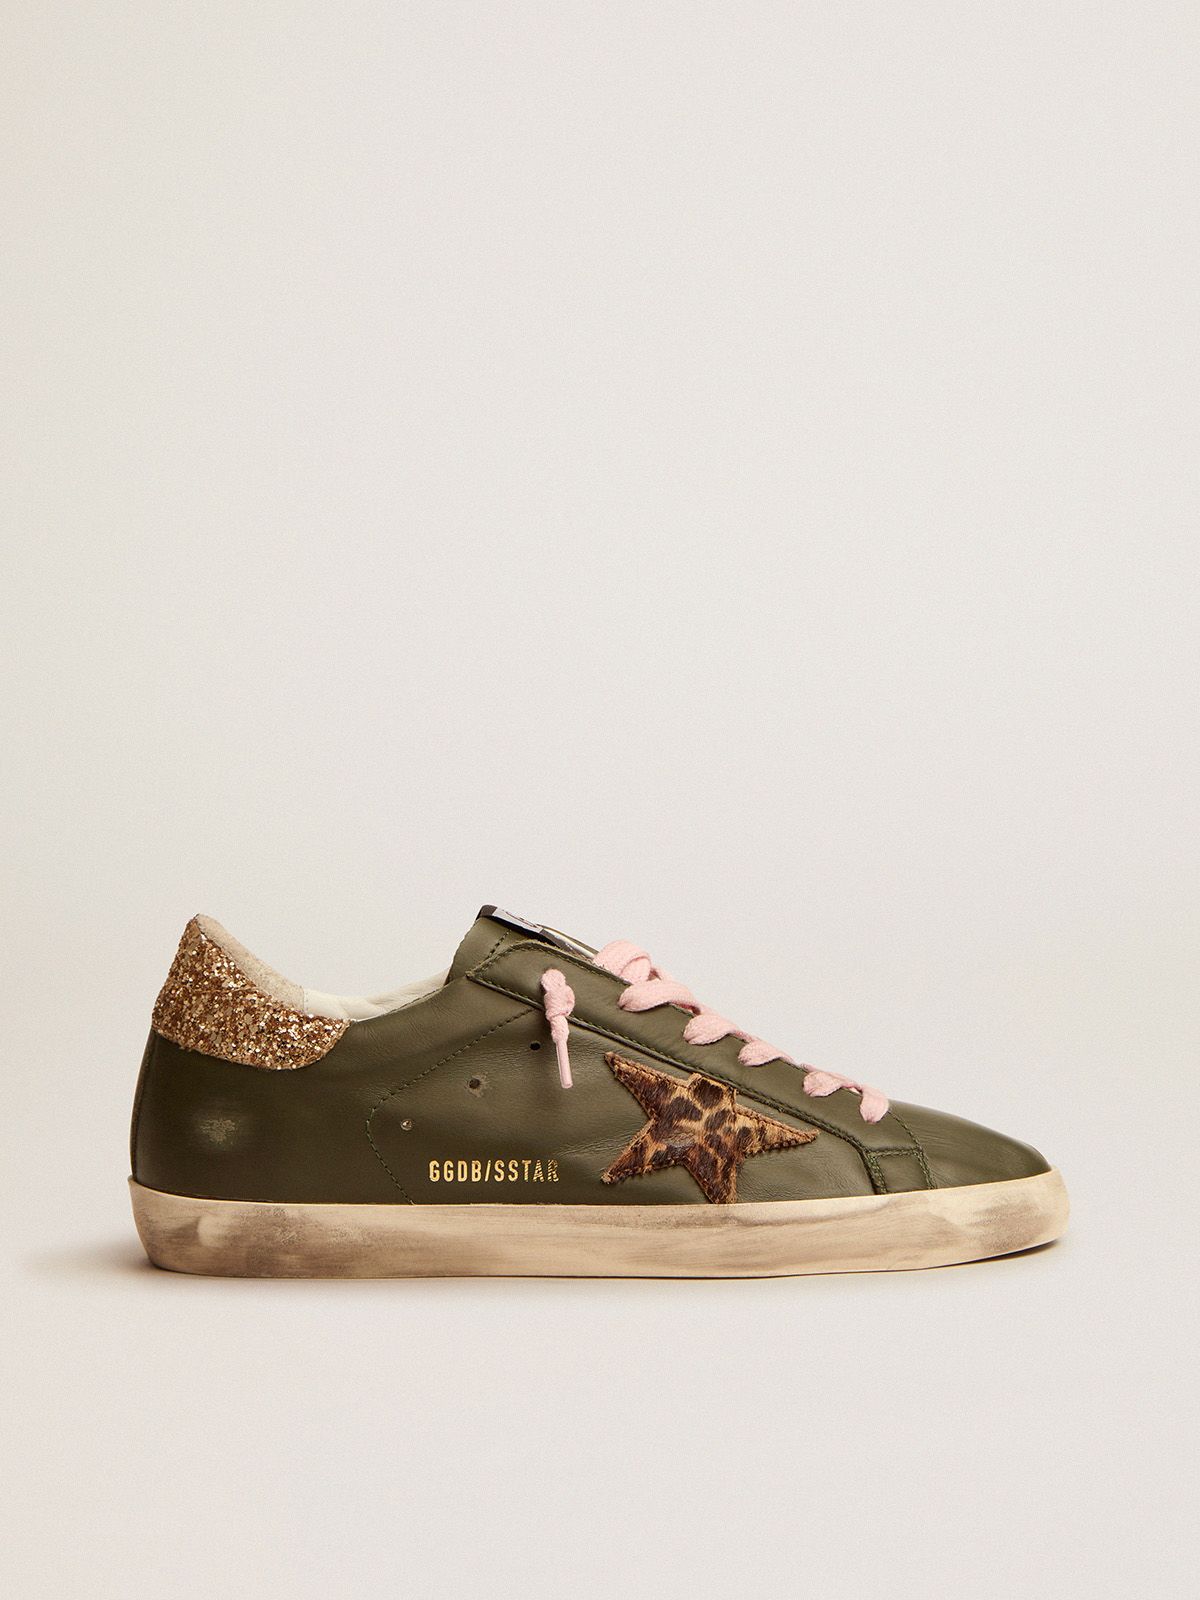 golden goose dark glitter in tab sneakers heel leather Super-Star green with gold